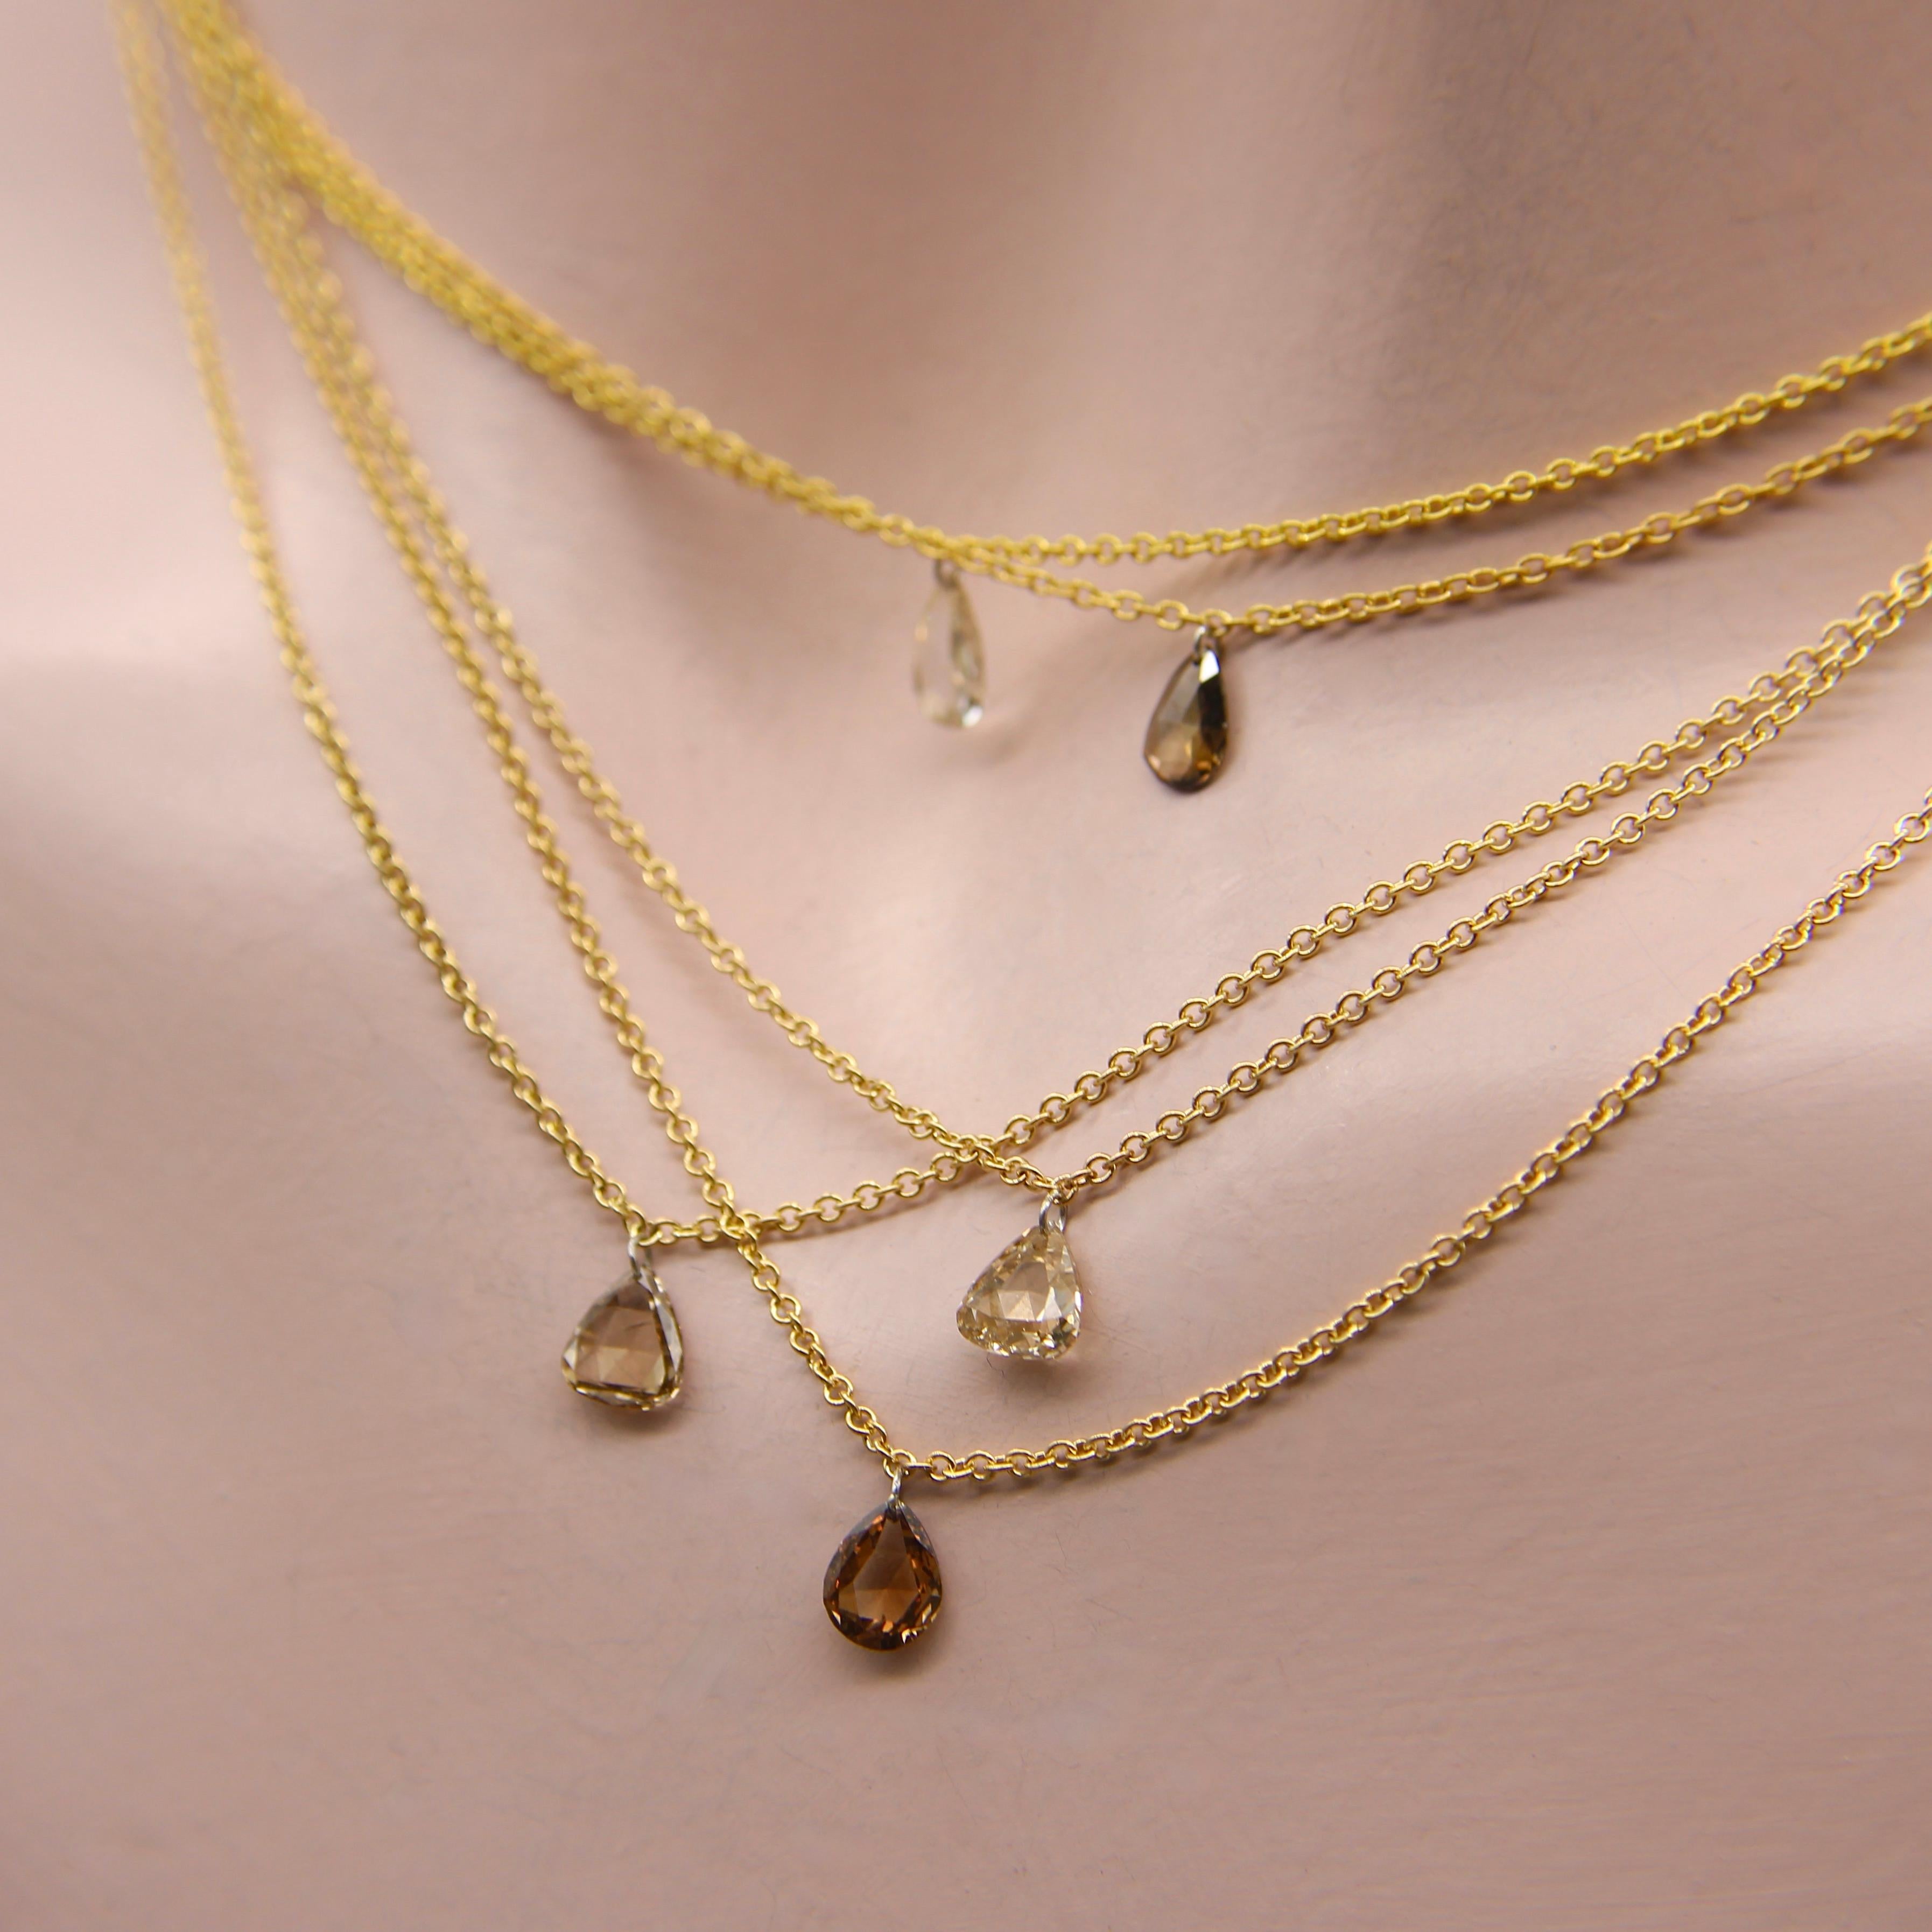 Women's or Men's Pear Shaped Dangling Chocolate Rose Cut Diamond on 18K Gold Chain  For Sale